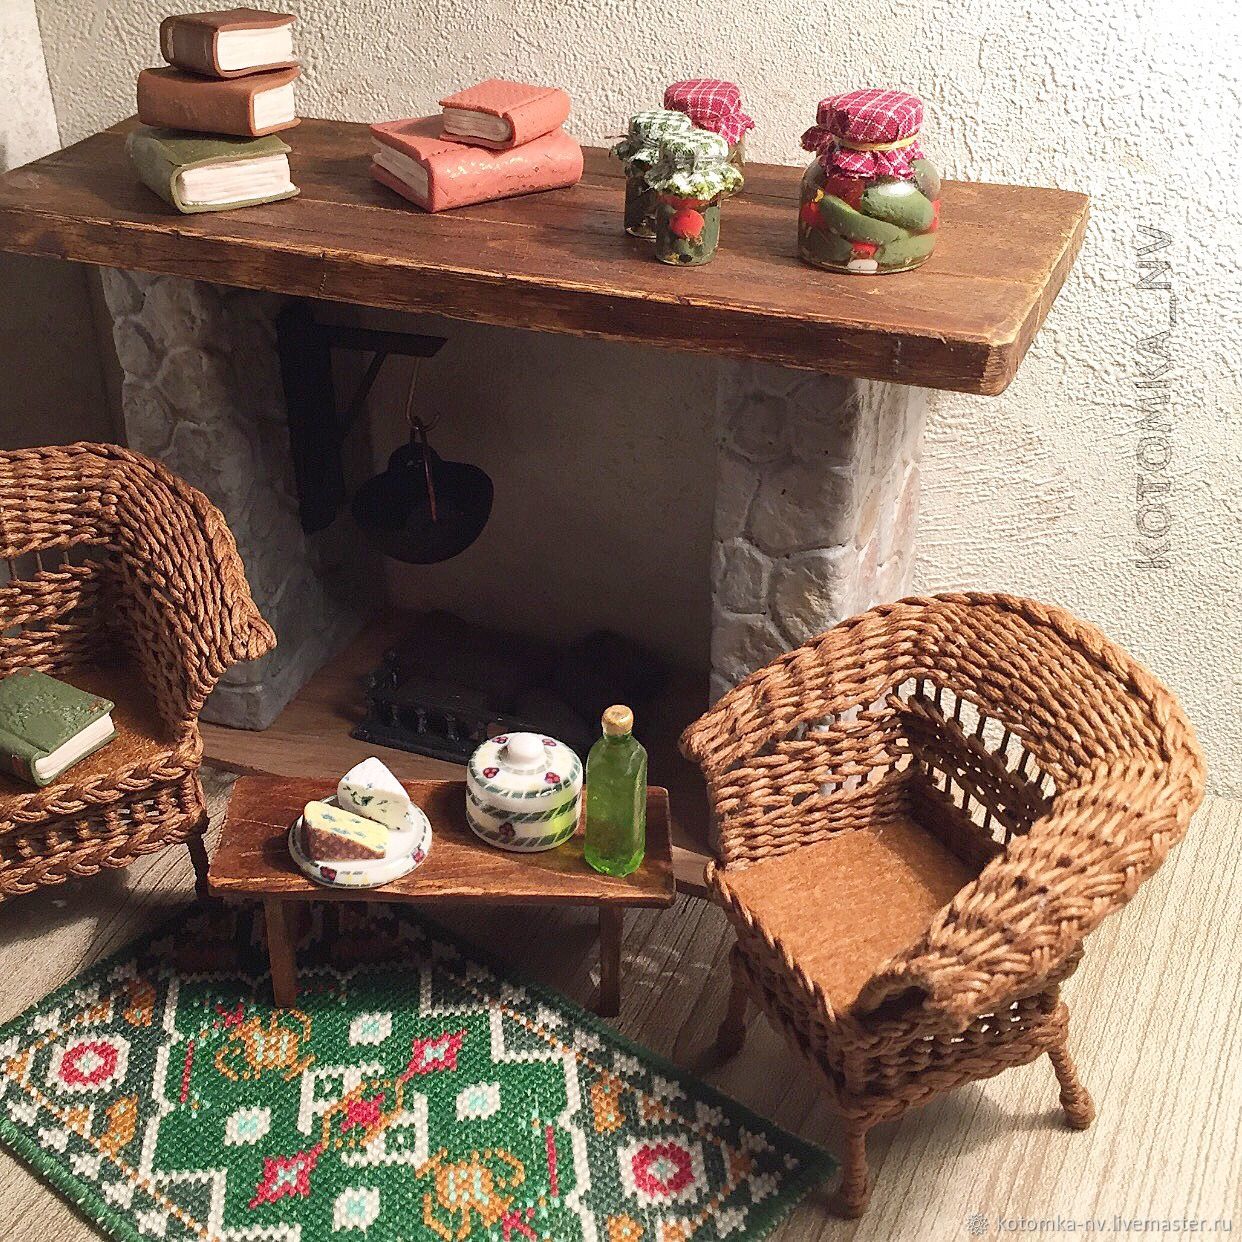 Chair for dolls wicker - Dollhouse miniature for doll #kotomka_nv_F004 - wicker chair for dolls - the seat is upholstered with felt
